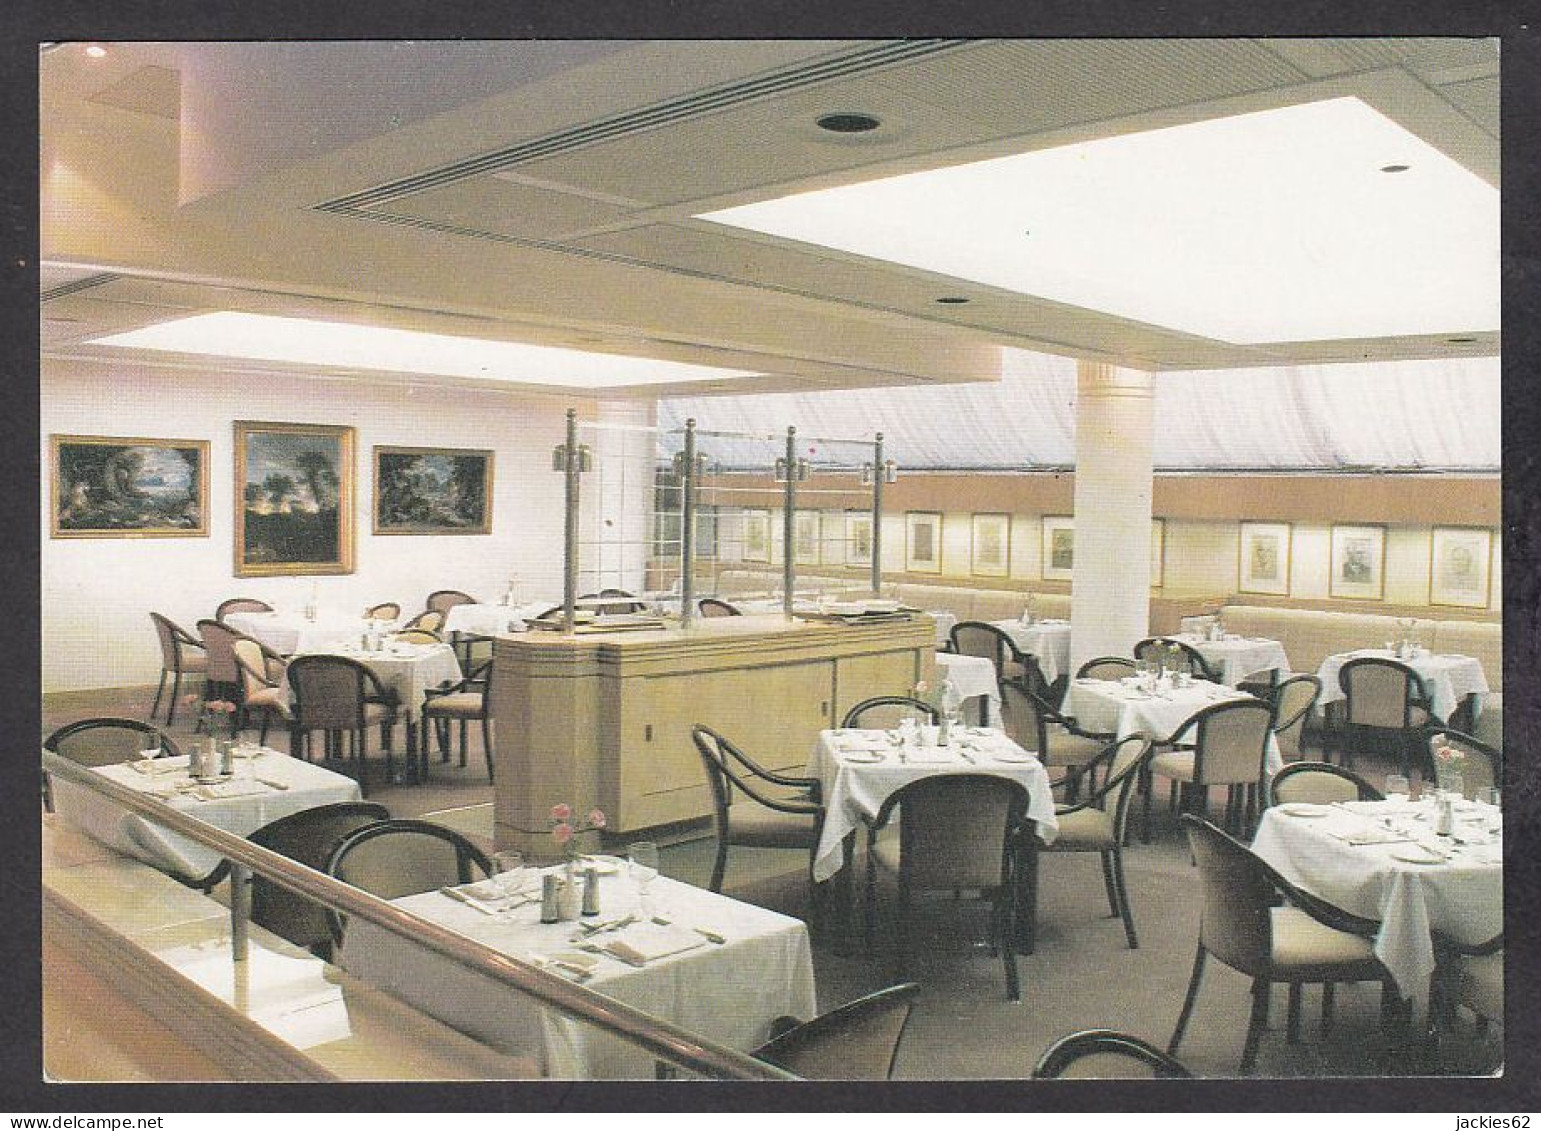 110962/ WESTMINSTER, The Royal Society Of Medicine, Dining Room - Londres – Suburbios